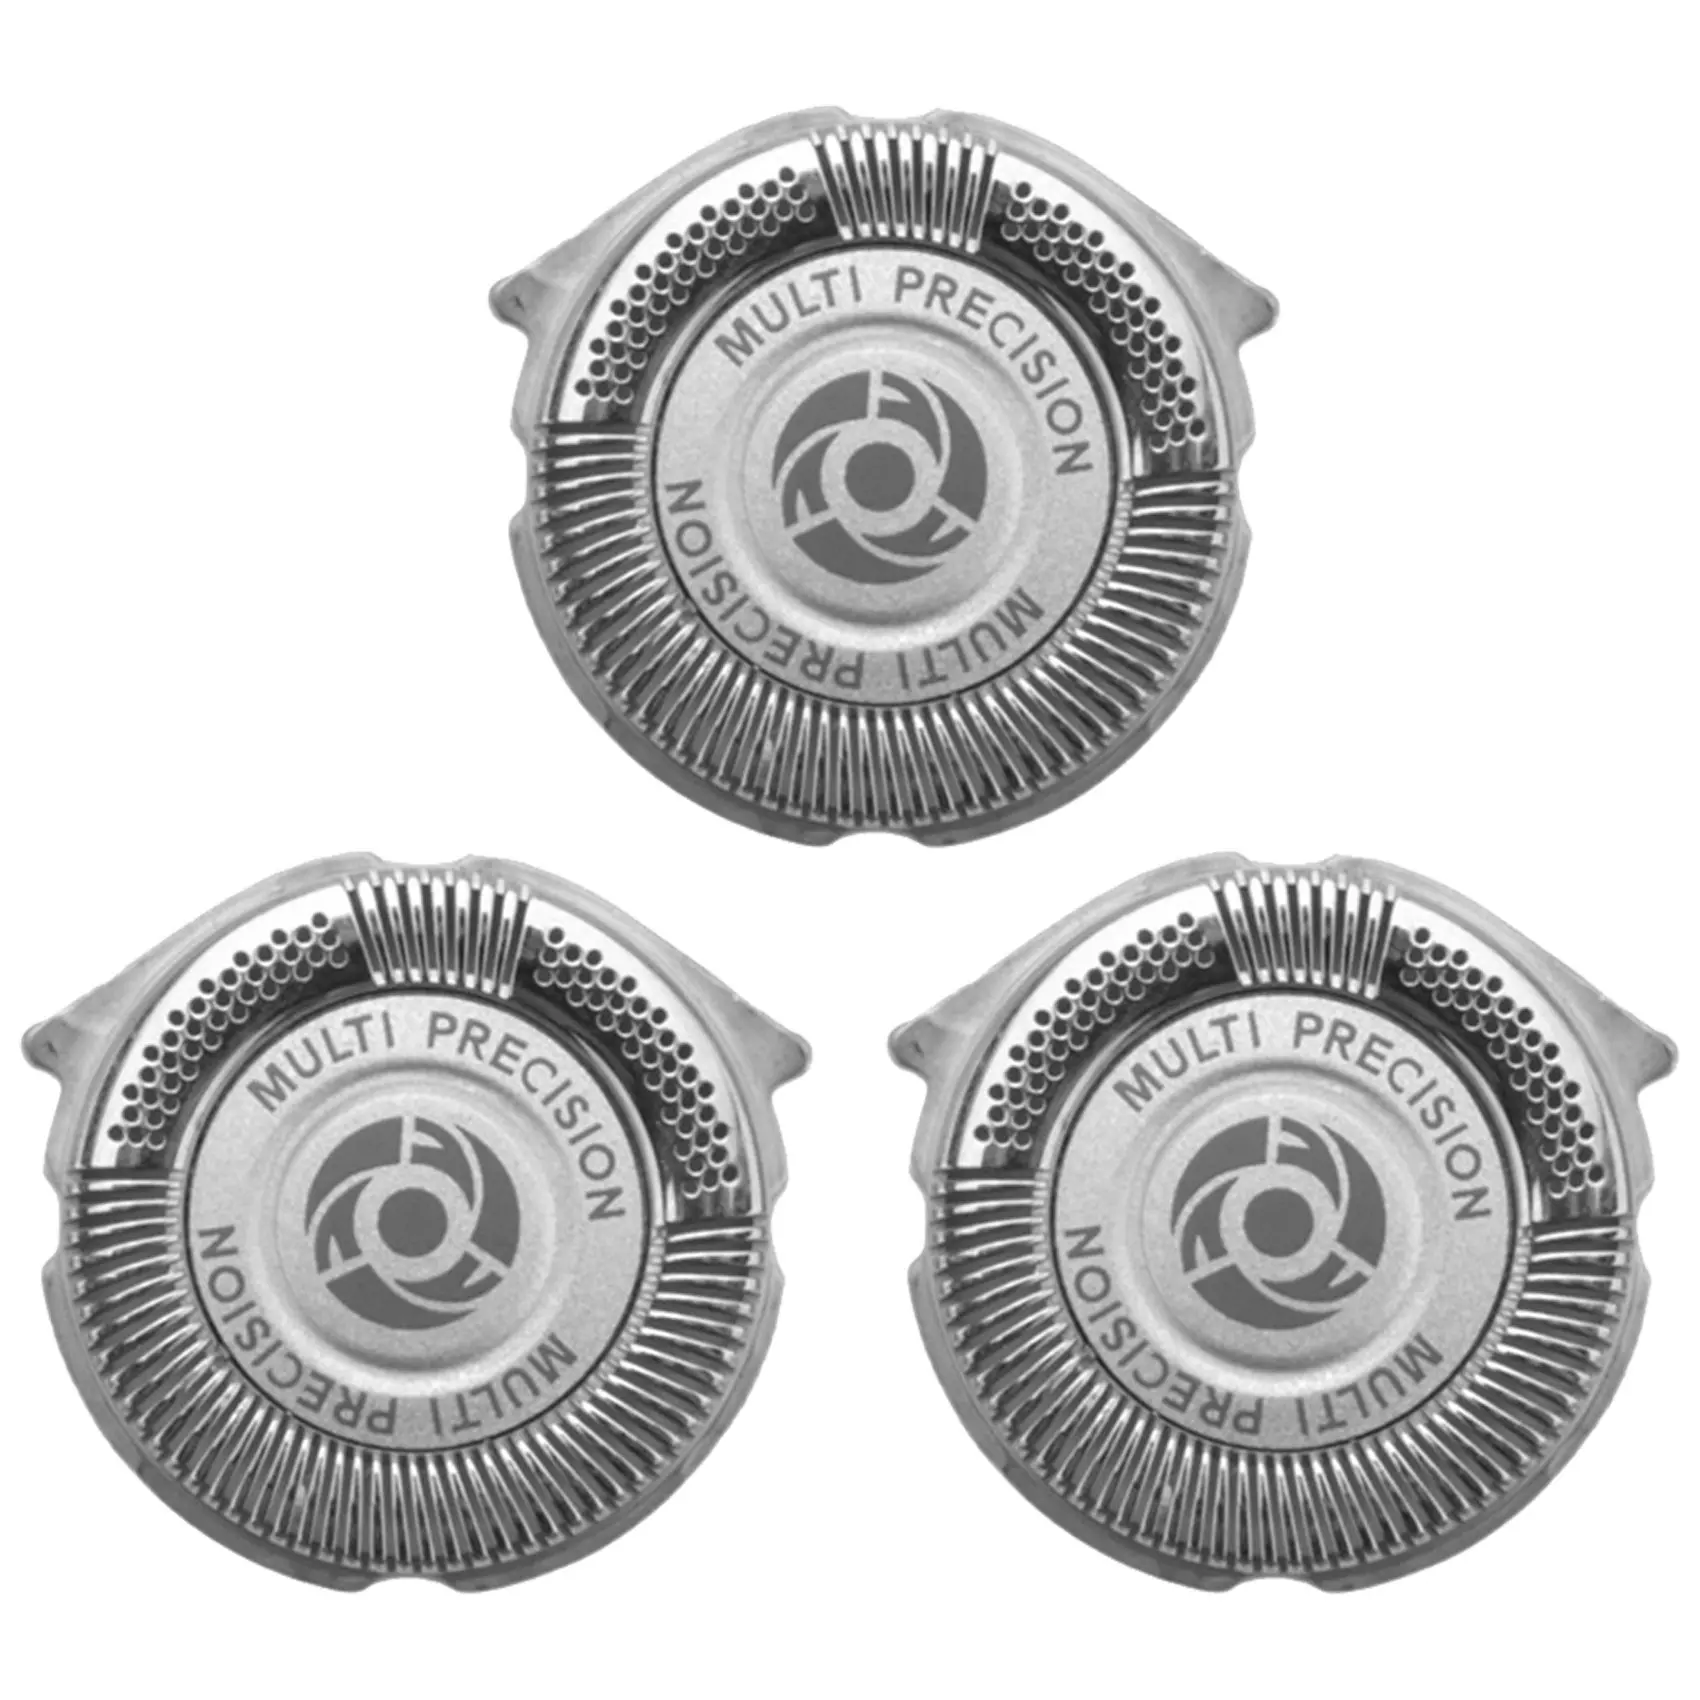 

3 Pieces SH50/52 Shaver Replacement Heads for Series 5000 and AquaTouch Shavers